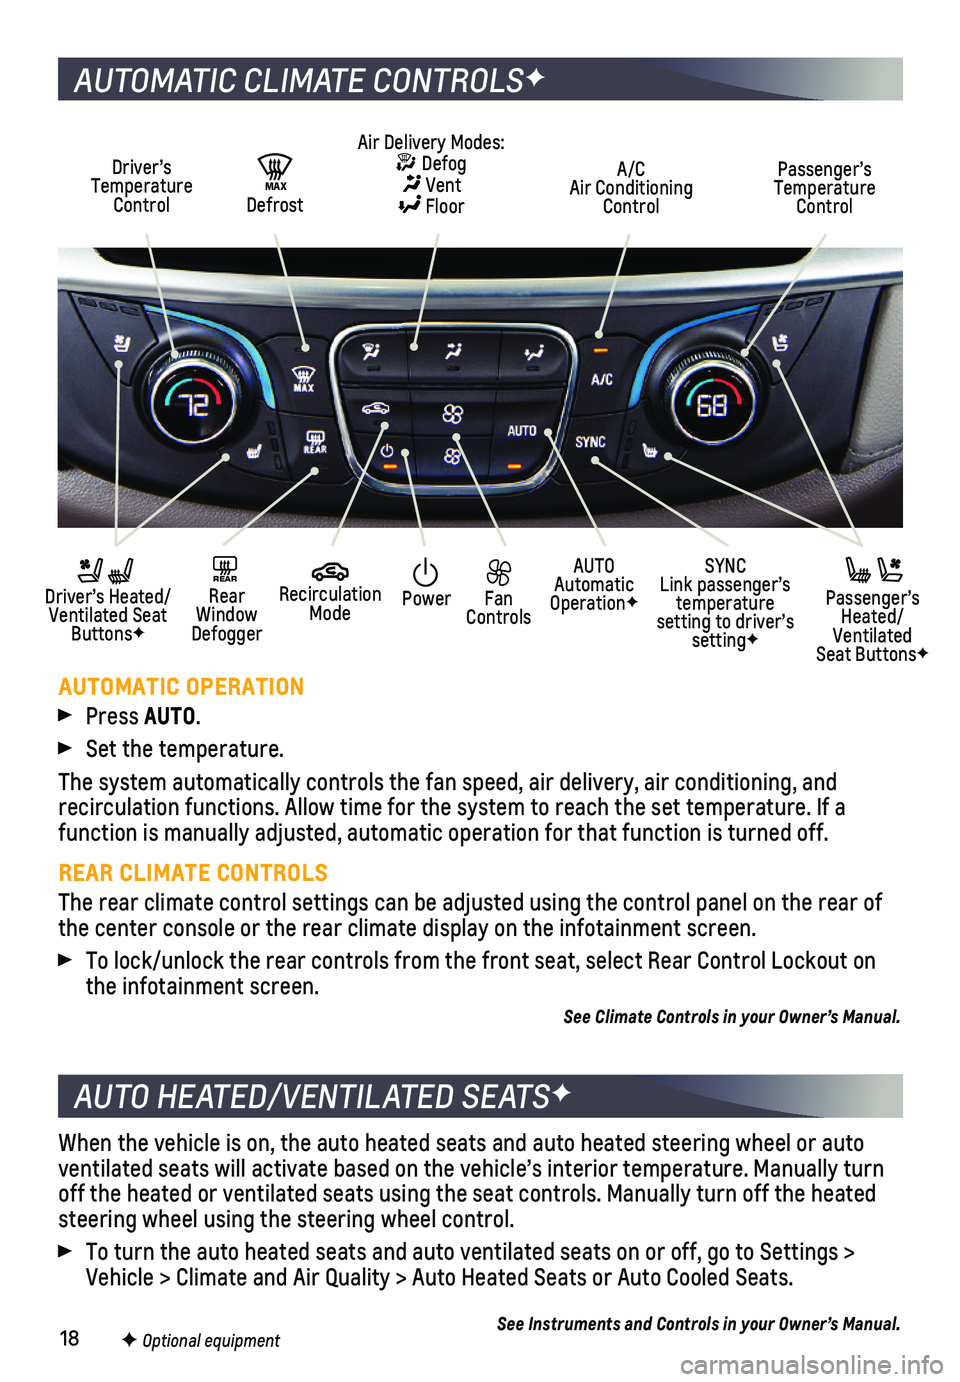 CHEVROLET TRAVERSE 2019  Get To Know Guide 18
When the vehicle is on, the auto heated seats and auto heated steering w\
heel or auto ventilated seats will activate based on the vehicle’s interior temper\
ature. Manually turn off the heated o